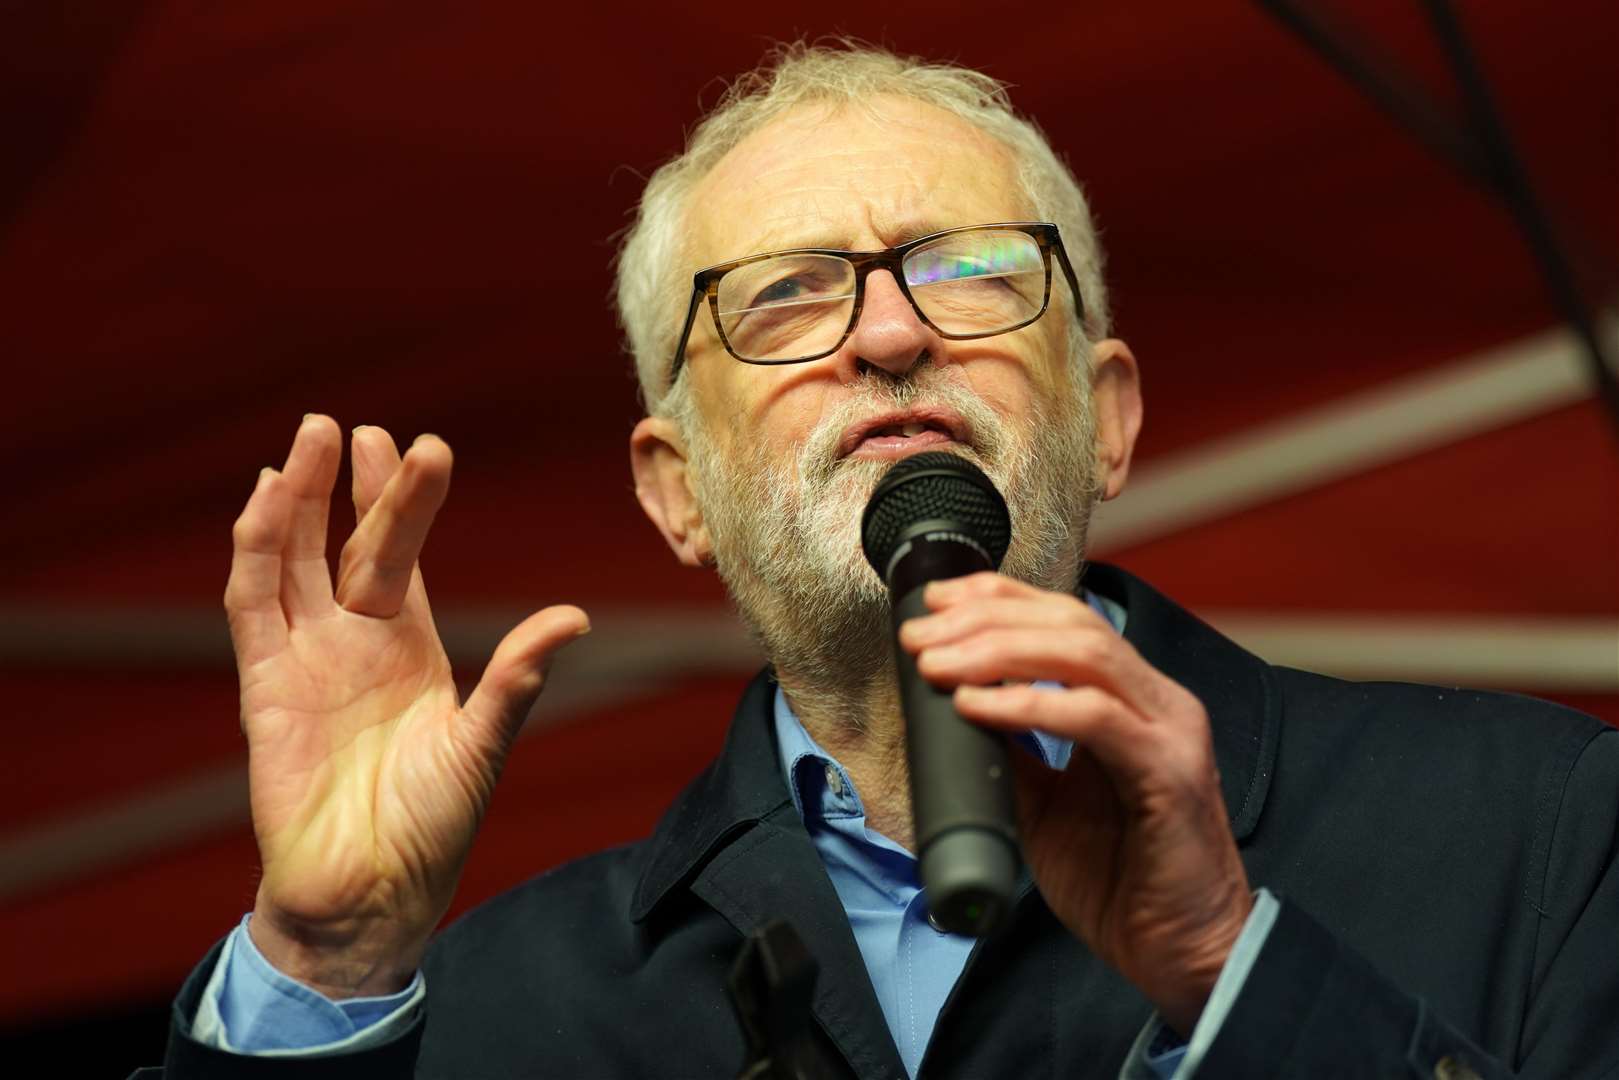 Jeremy Corbyn speaking to protesters outside the Houses of Parliament in London as the Bill on minimum service levels during strikes reached its second reading (Kirsty O’Connor/PA)